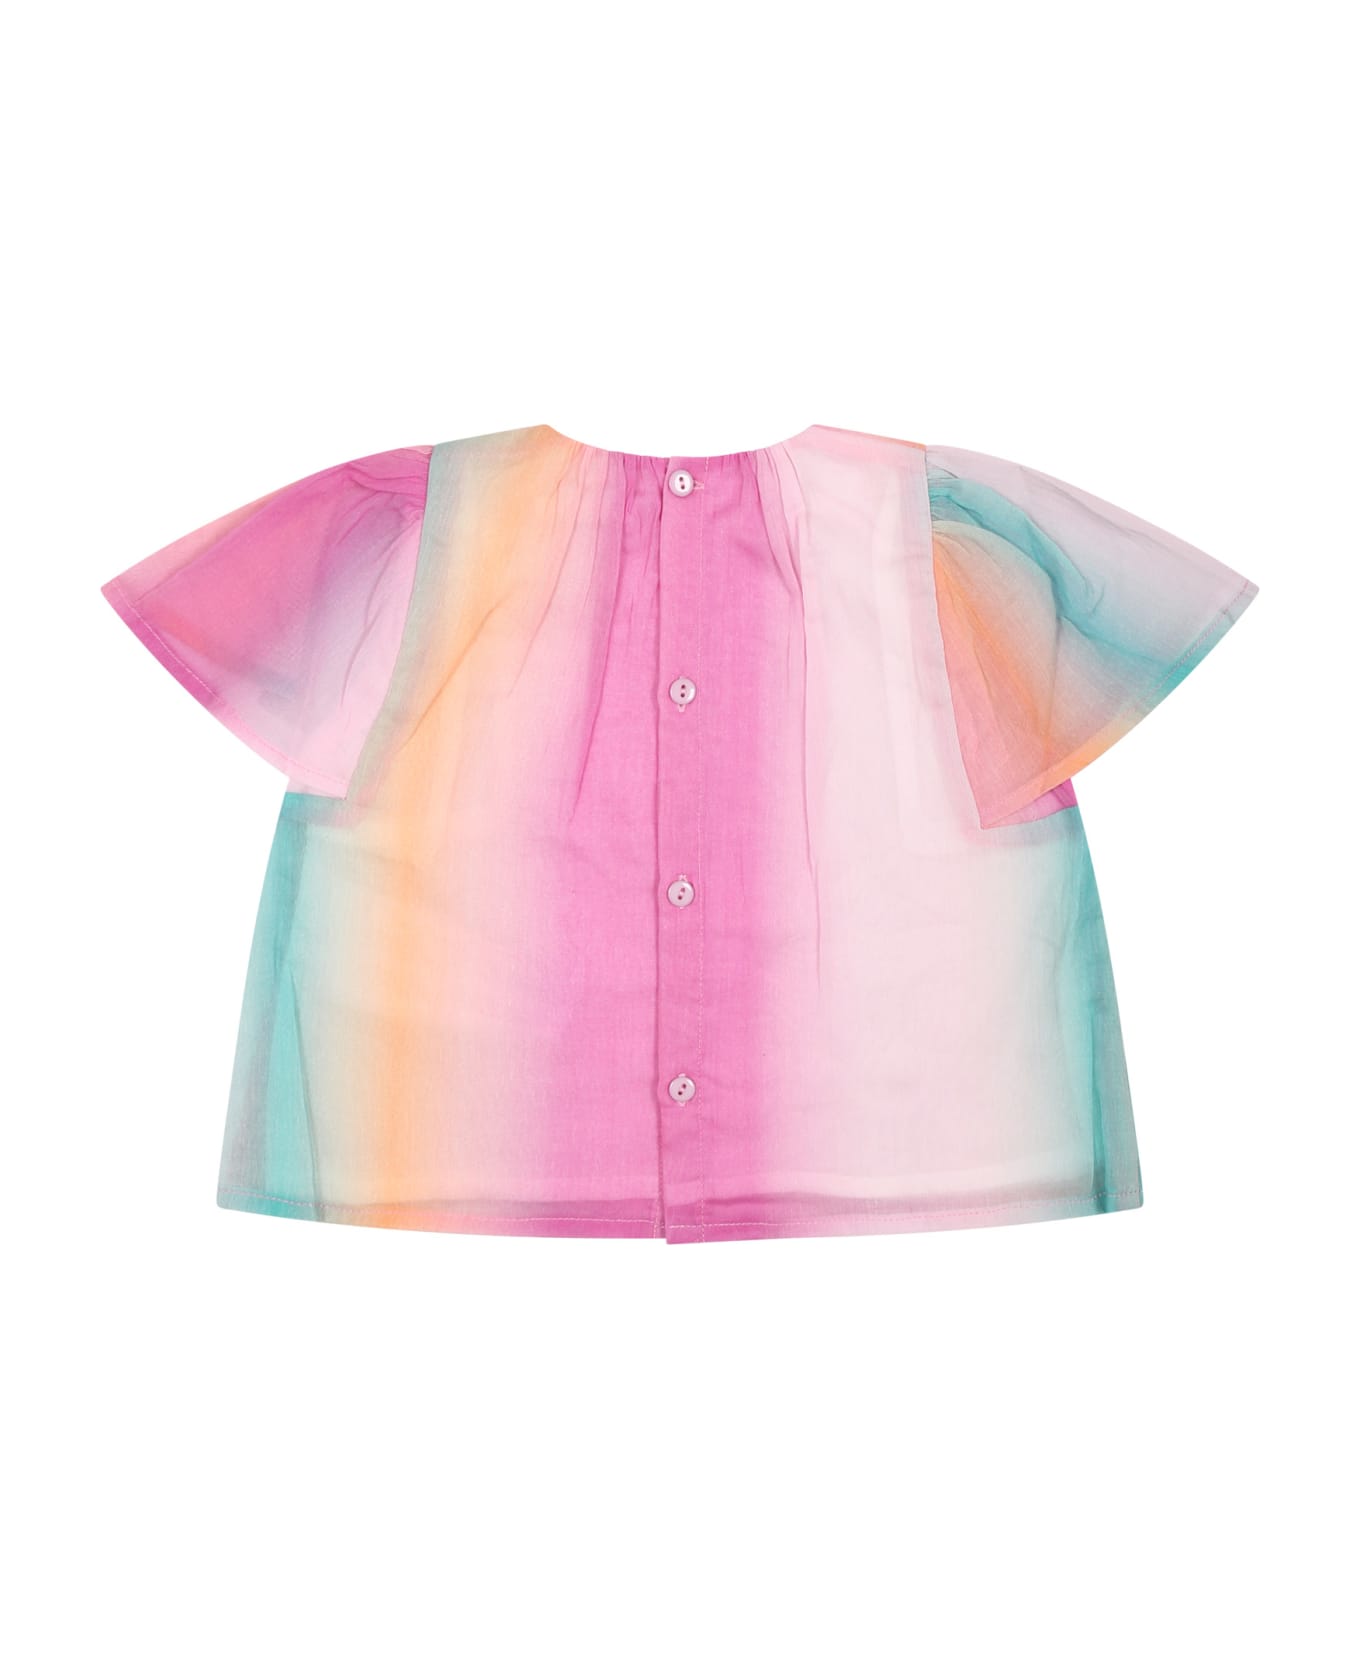 Chloé Multicolor Top For Baby Girl - Multicolor トップス